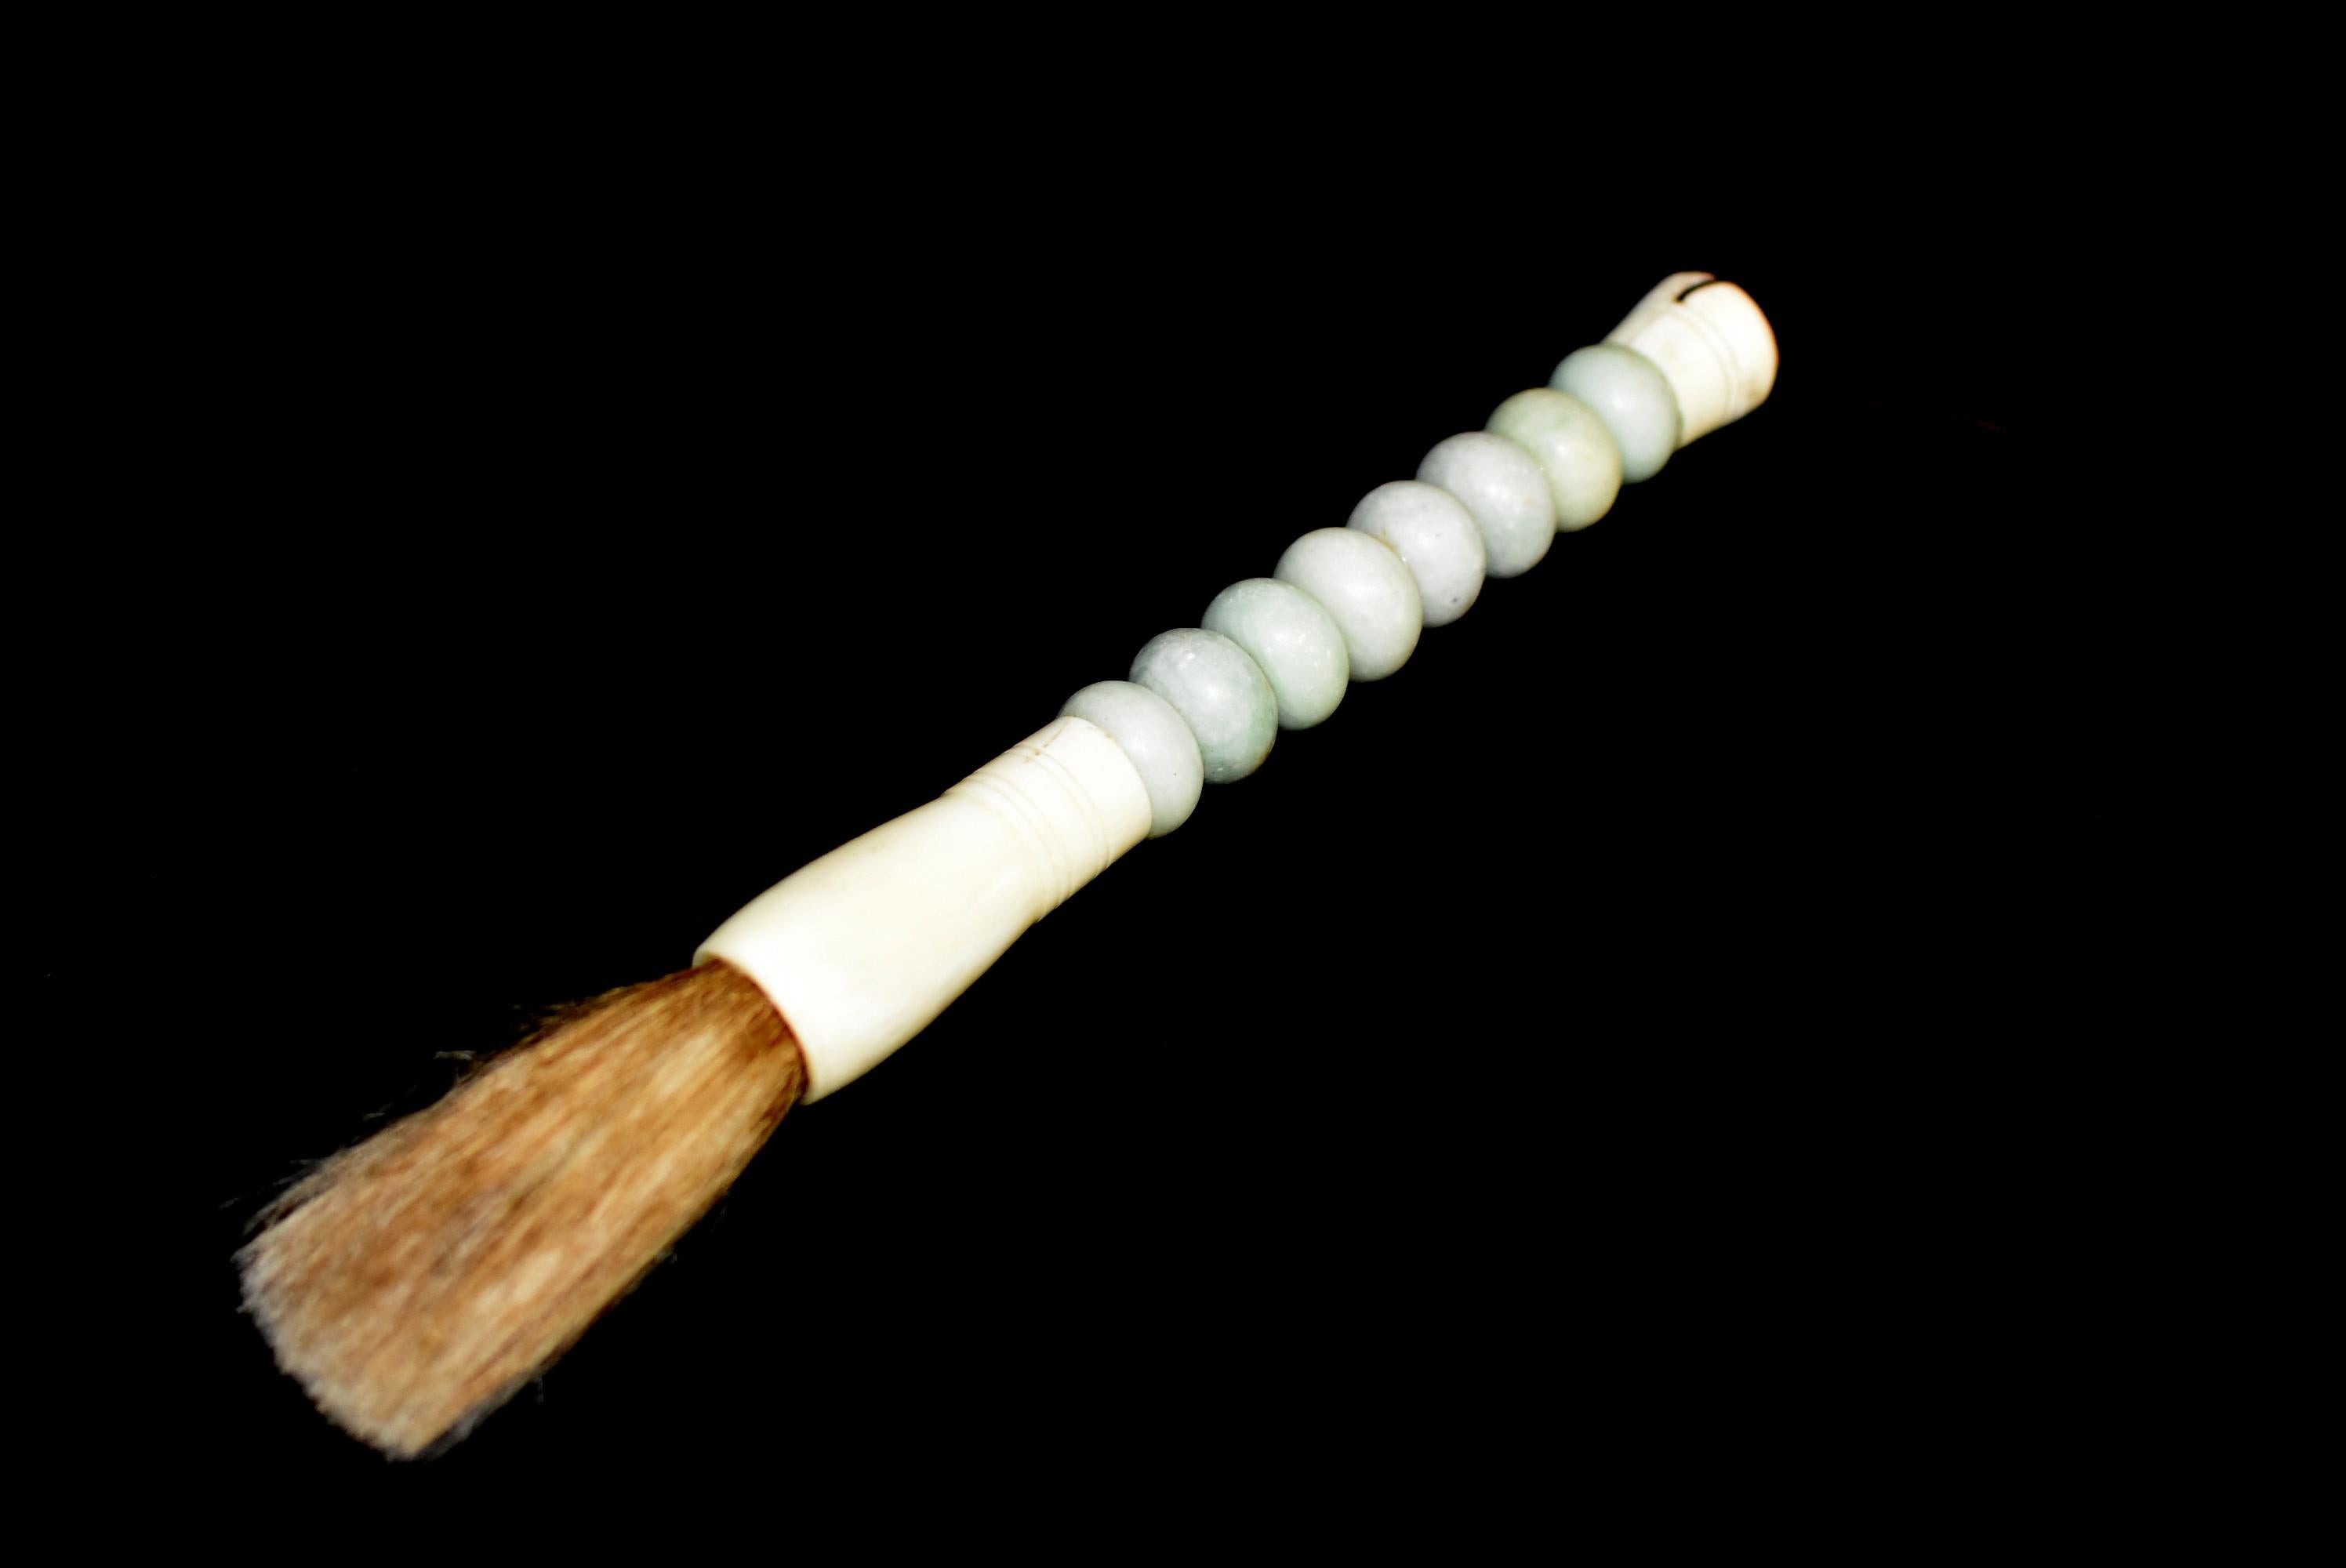 Beautiful single Chinese calligraphy brush with handmade stone handle. The stone is a beautiful large 1.5